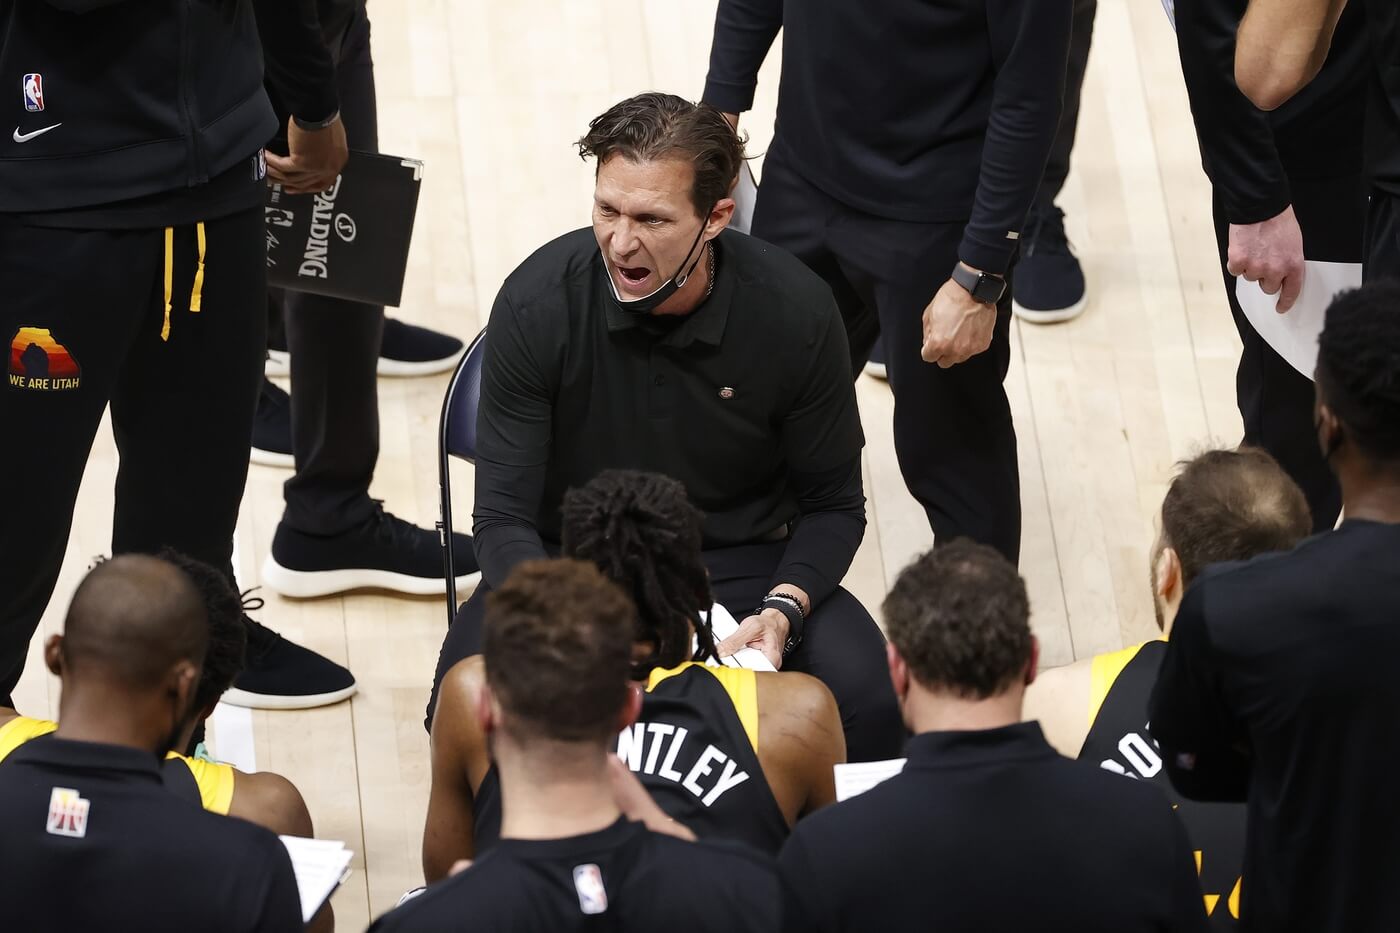 Apr 13, 2021; Salt Lake City, Utah, USA; Utah Jazz head coach Quin Snyder directs his team in the second quarter against the Oklahoma City Thunder at Vivint Smart Home Arena. Mandatory Credit: Jeffrey Swinger-USA TODAY Sports